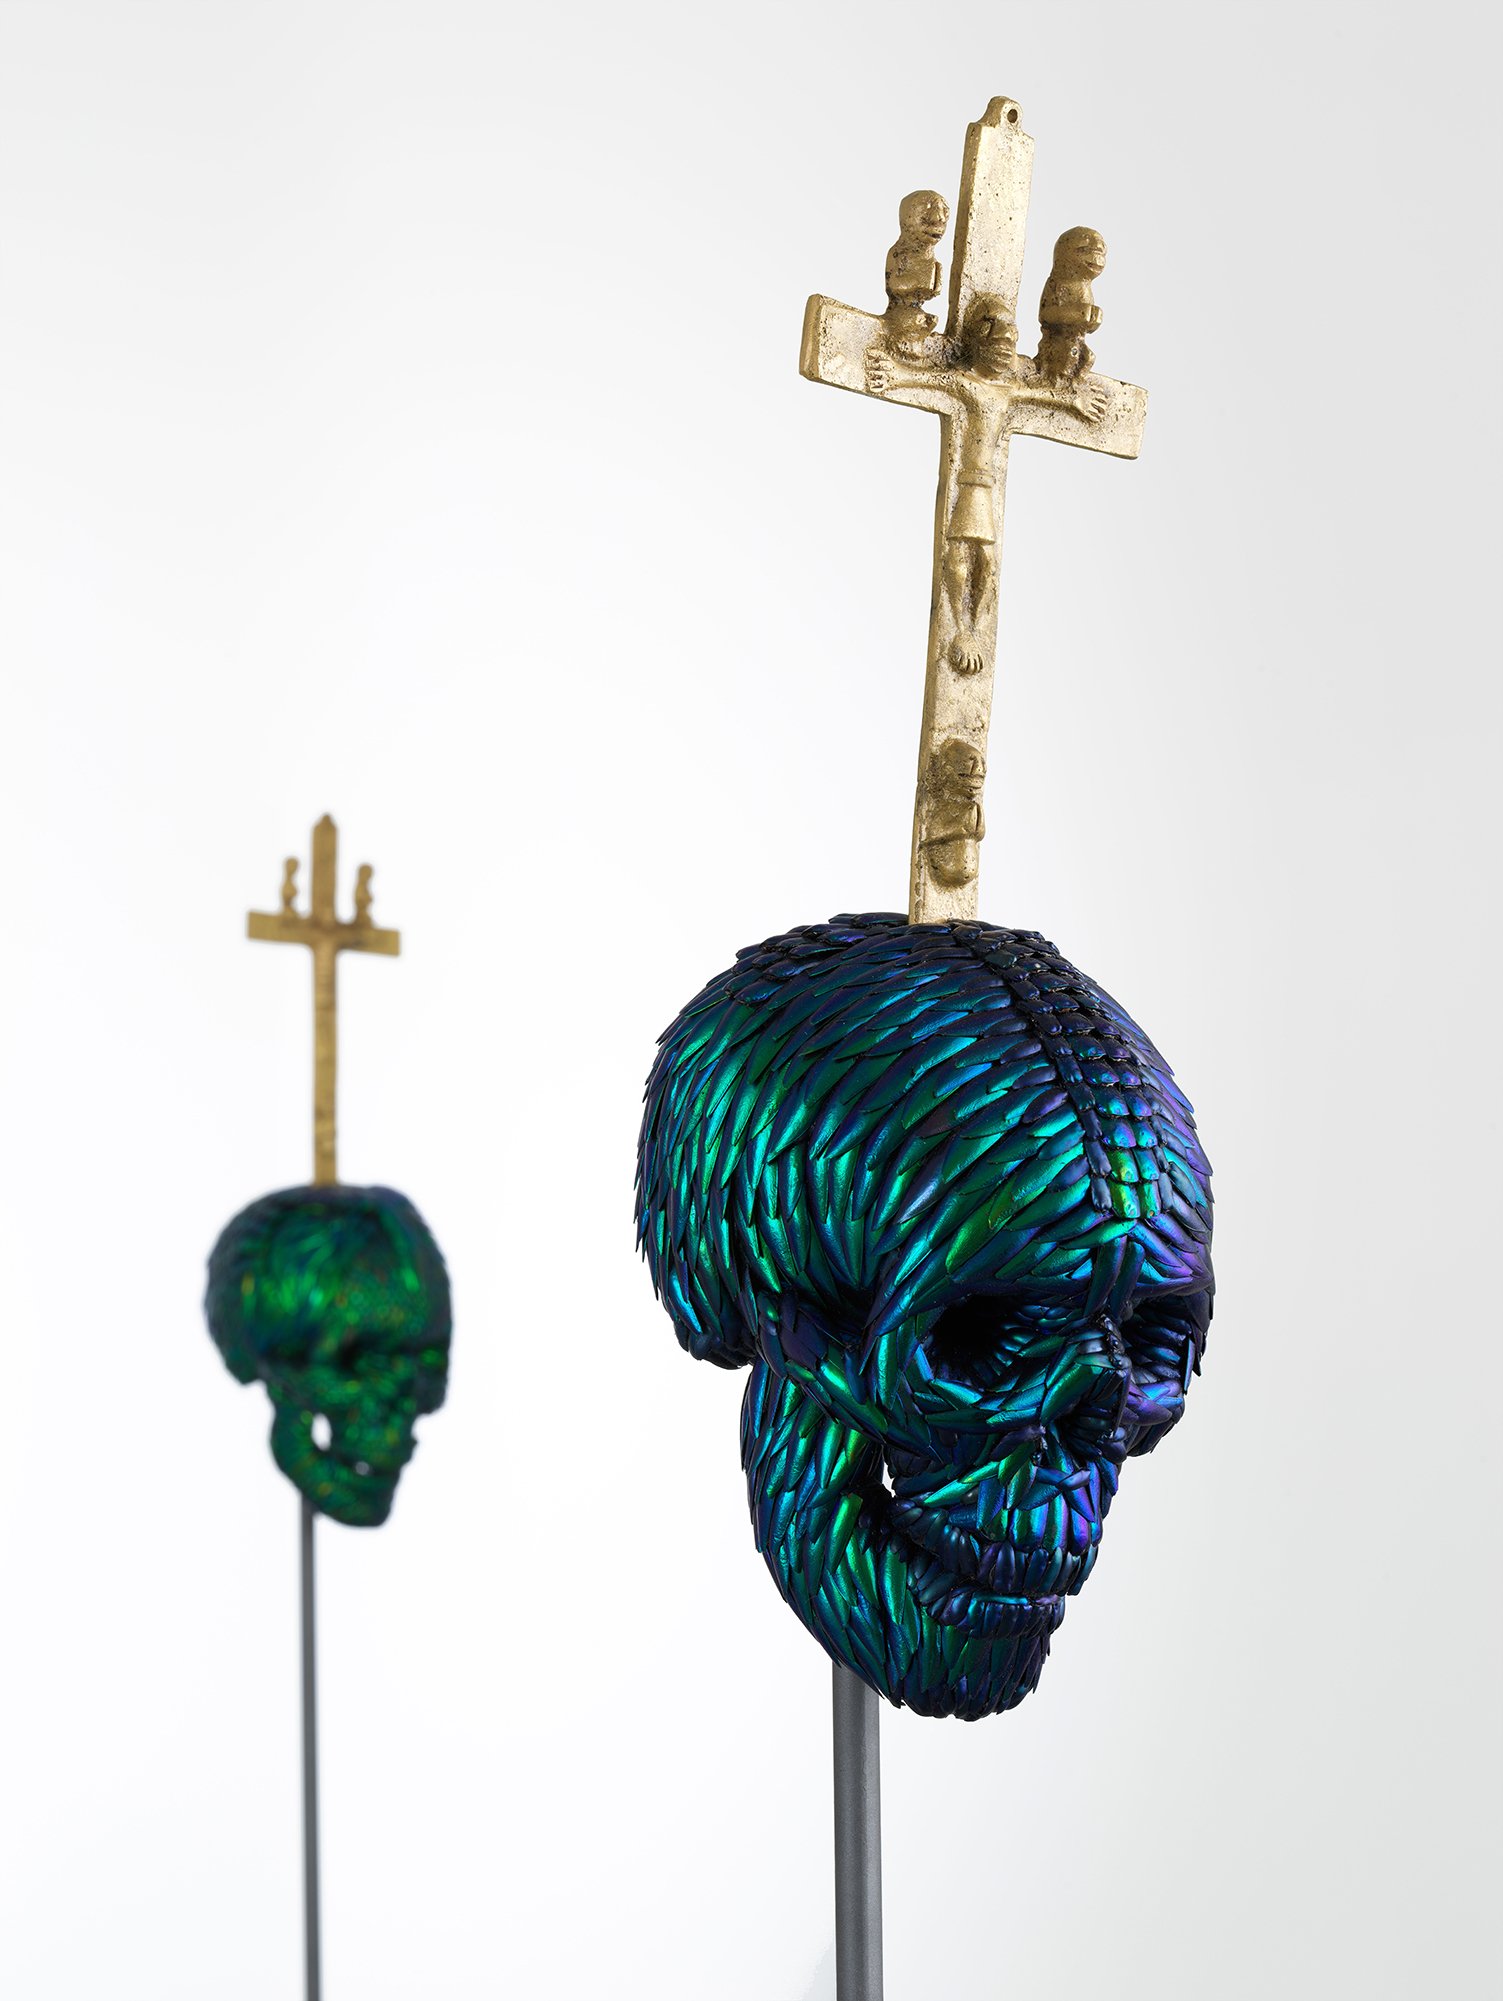 4c.-Jan-Fabre,-Tribute-to-Hieronymus-Bosch-in-Congo,-29-March-–-30-September-2019,-installation-view-of-Skull-with-Bacongo-Cross.jpg